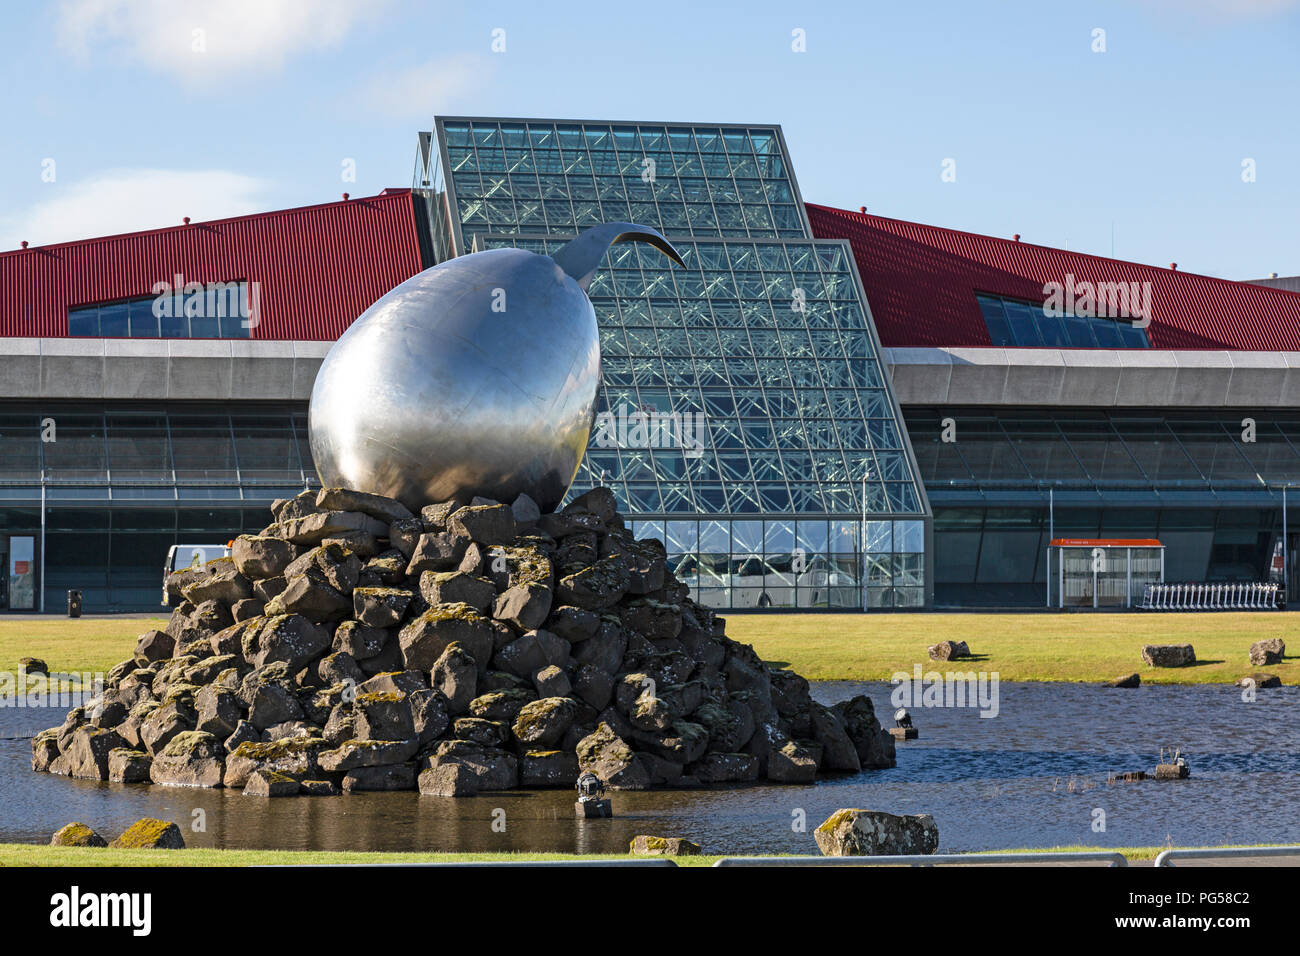 Keflavik International Airport near Reykjavik in Iceland. Abstract sculpture called The Jet Nest by Magnus Thomasson in front. Stock Photo